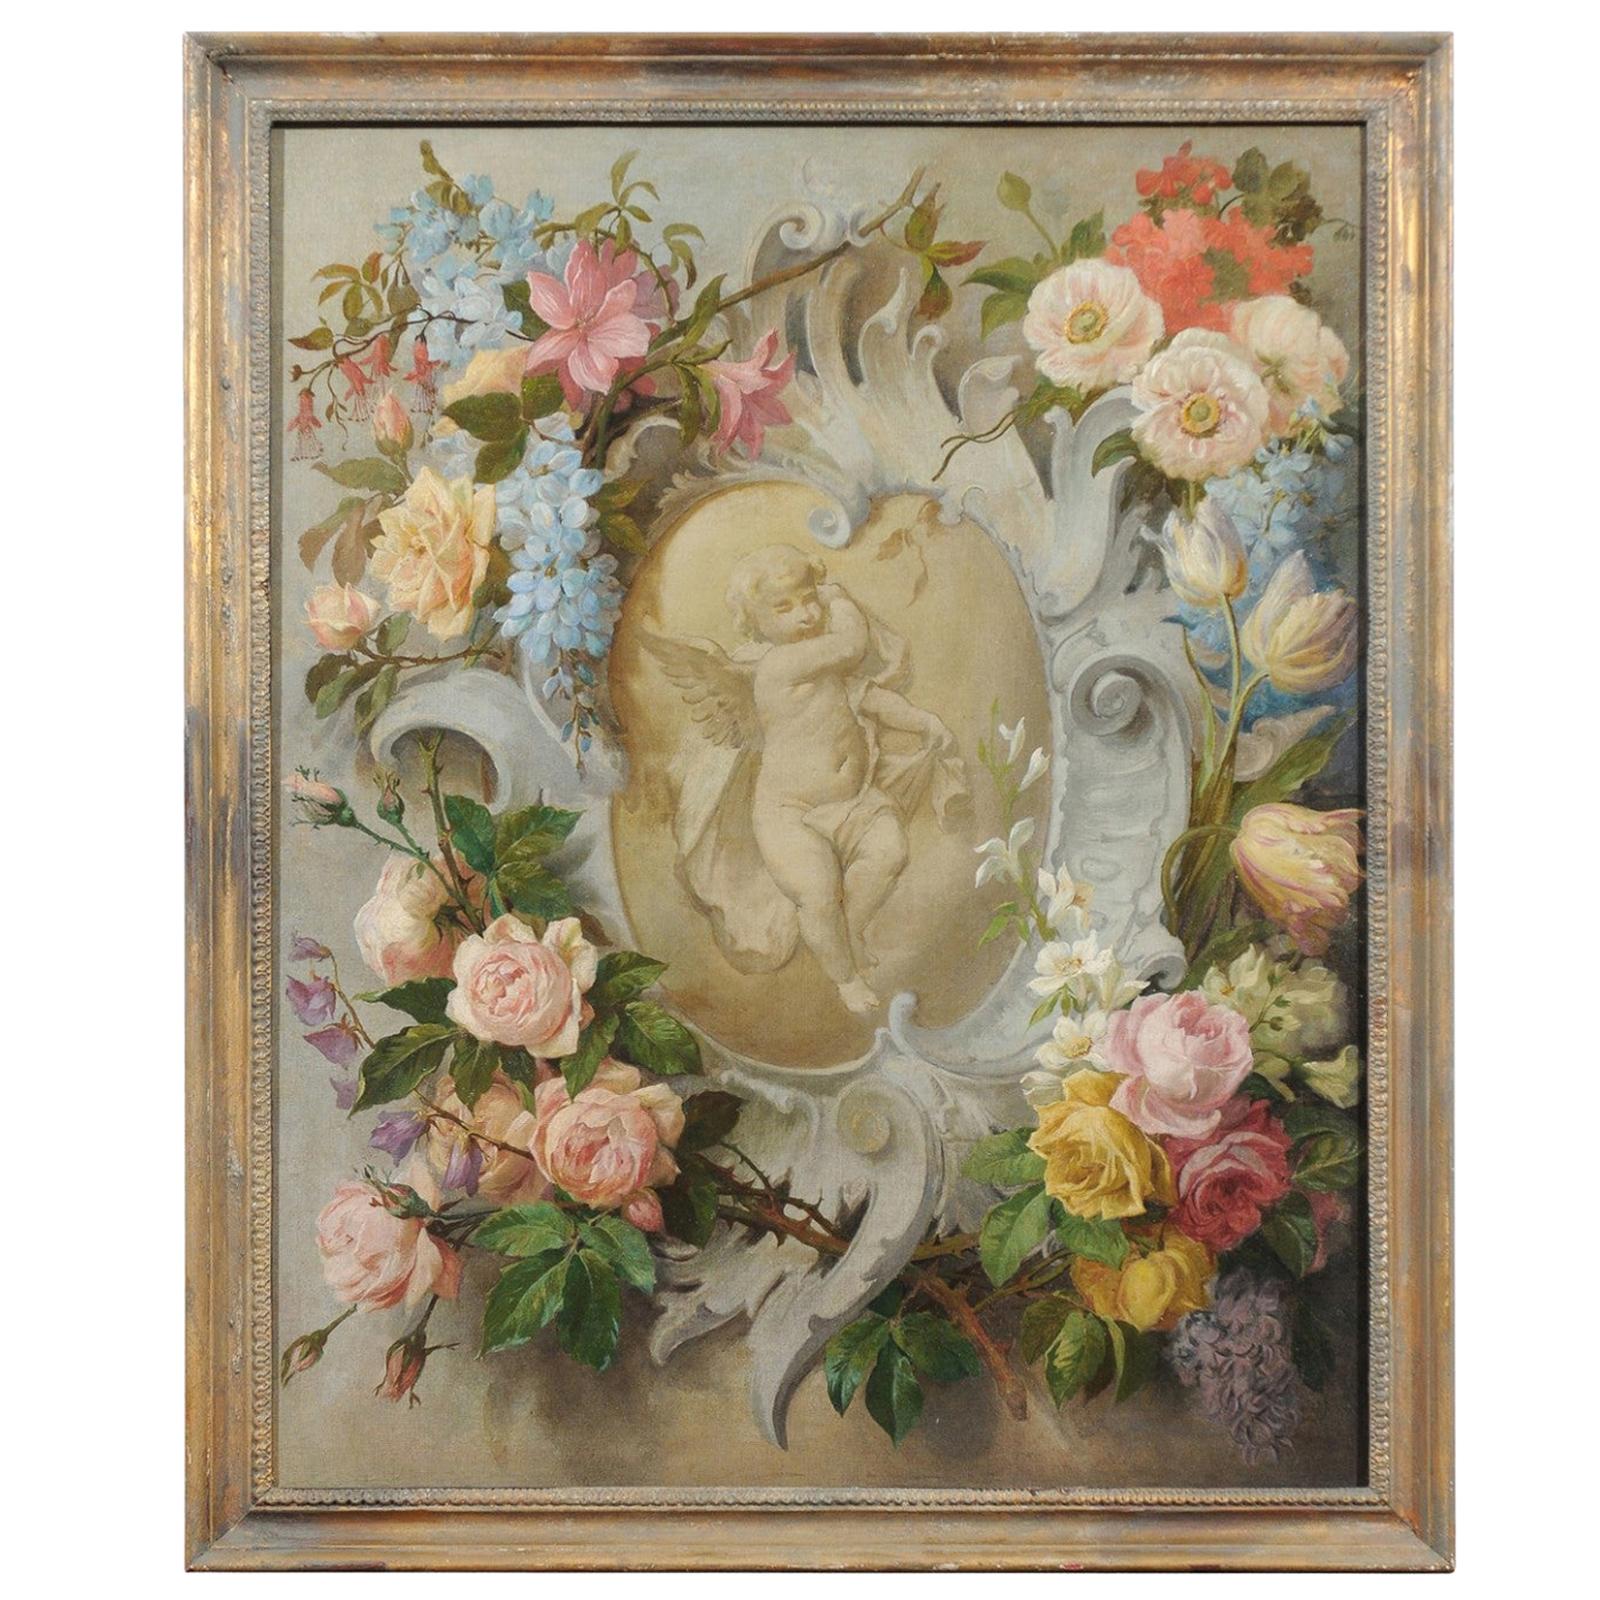 French 19th Century Aubusson Cartoon with Floral Decor Surrounding a Cherub